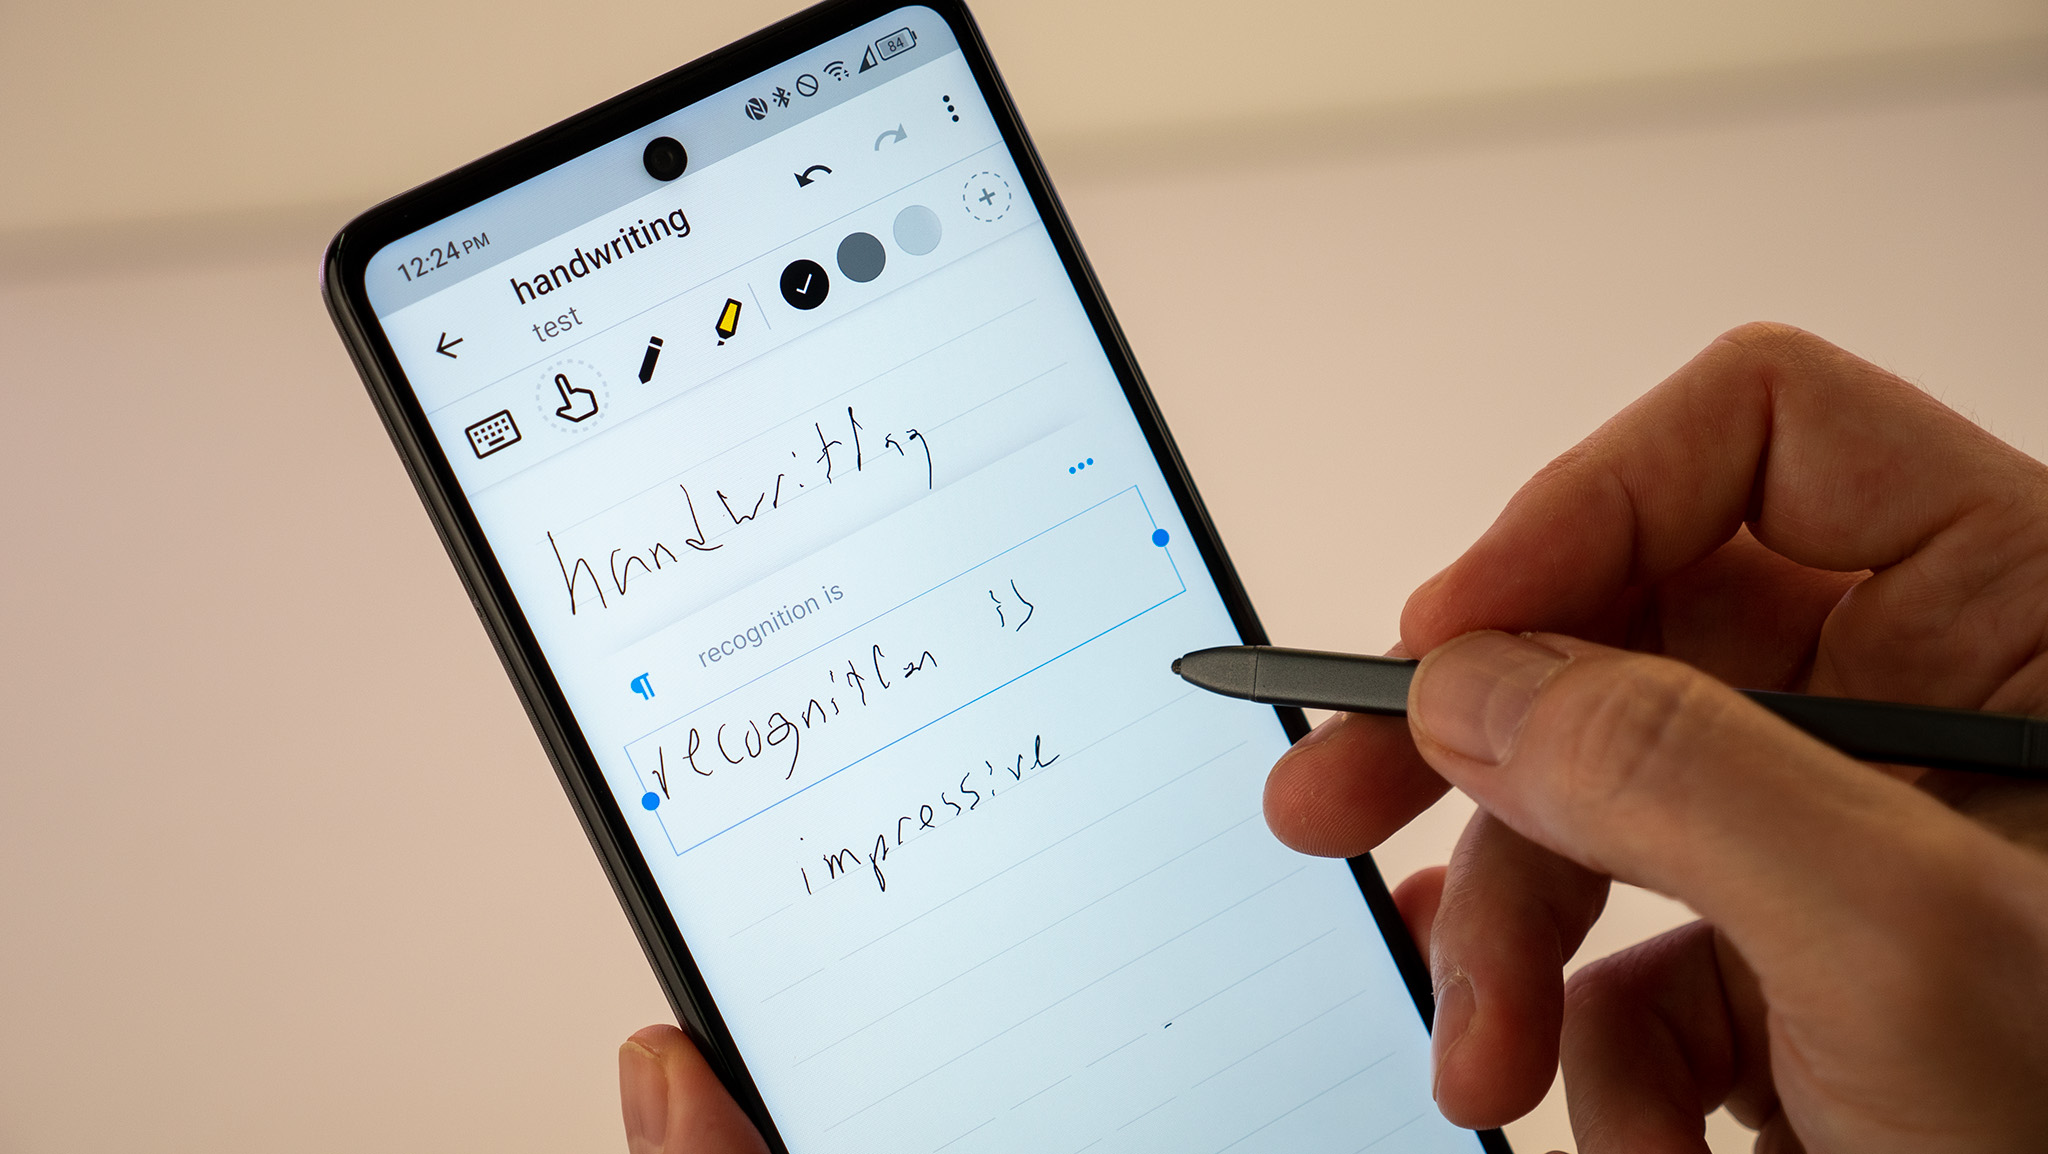 TCL Stylus 5G Nebo app handwriting recognition